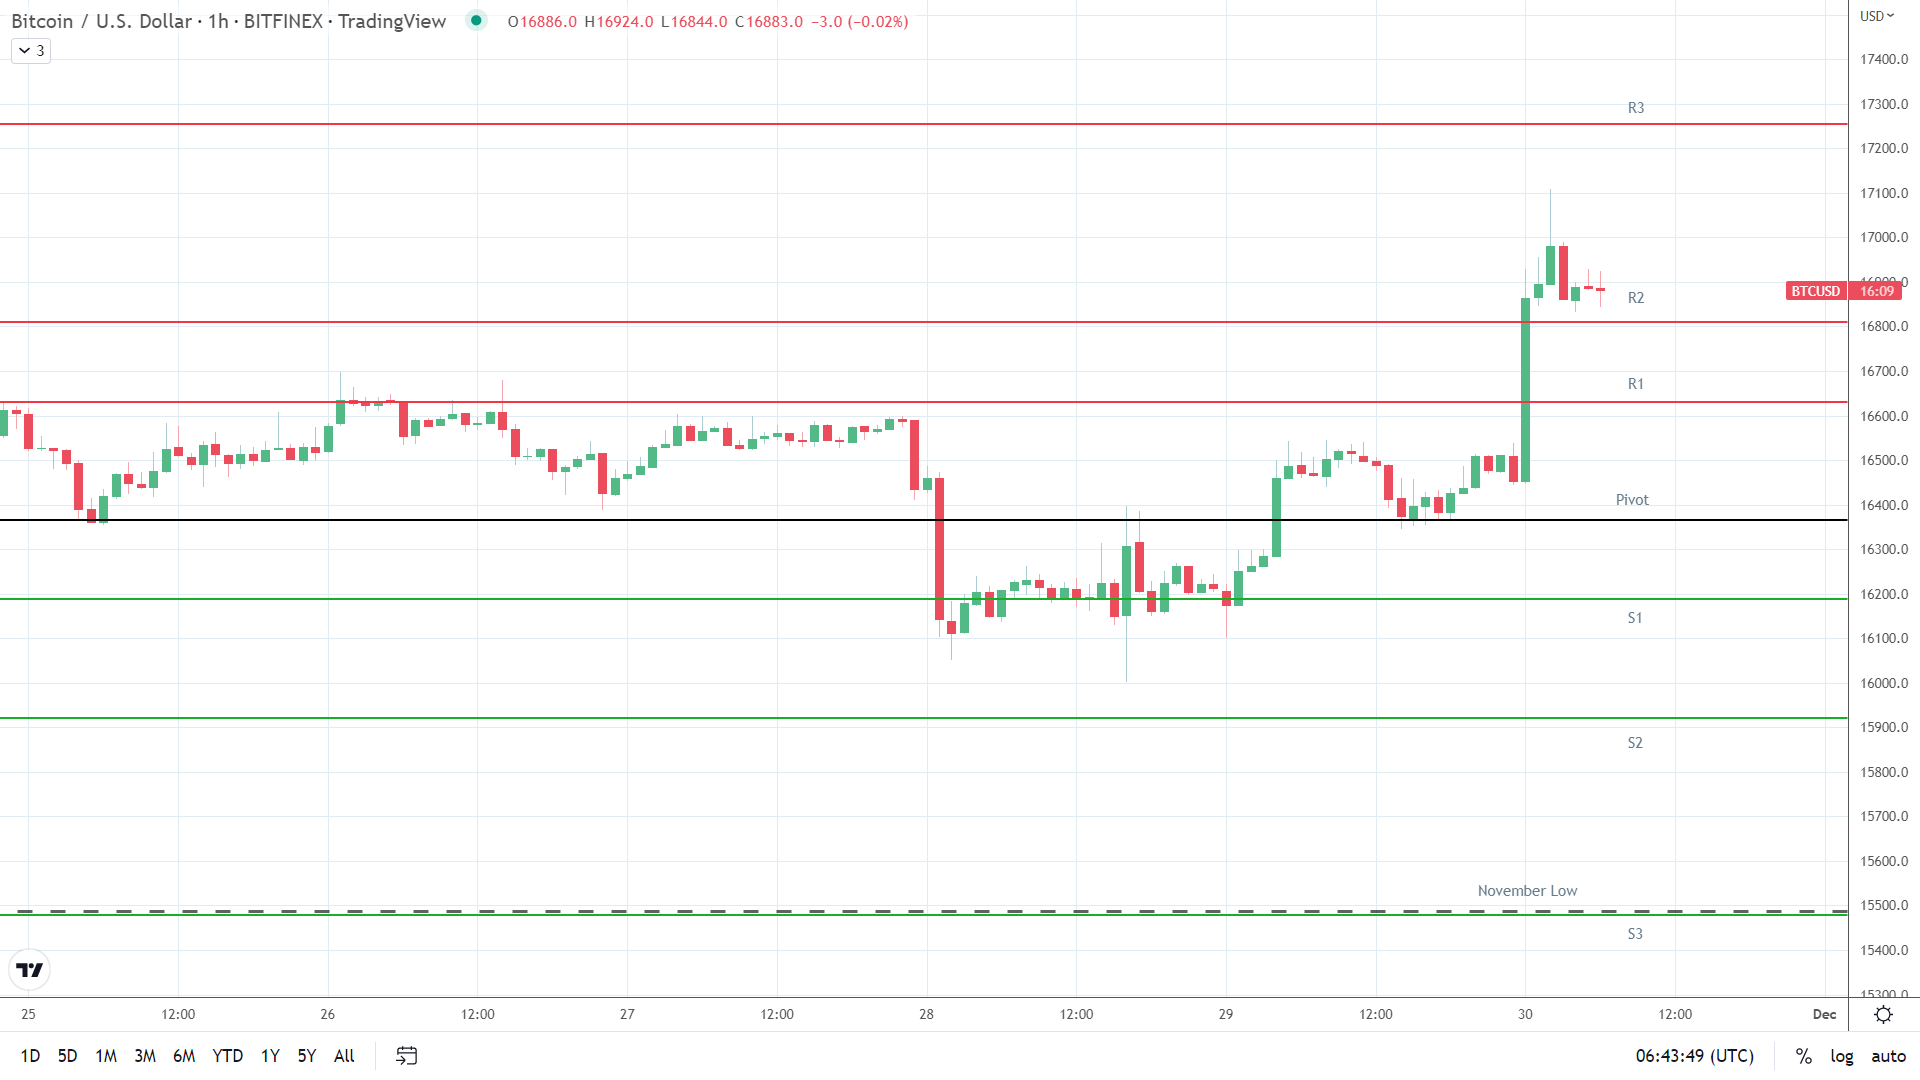 BTC resistance levels in play.